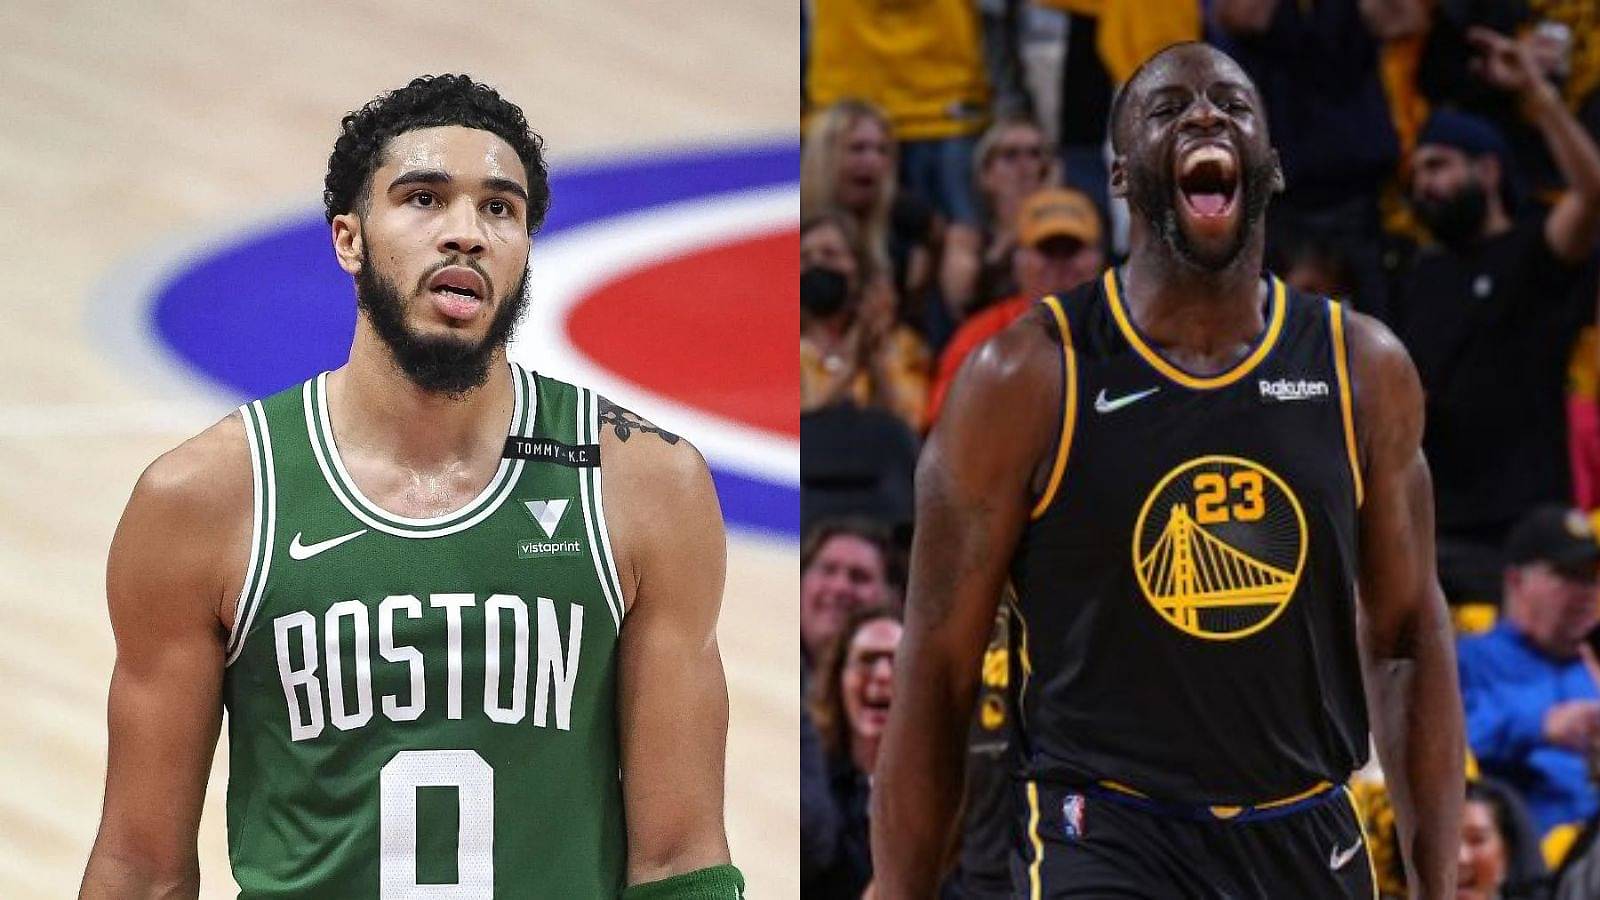 "Draymond Green ain't say nothing, I said fu*k it, I just took the ball with me": Jayson Tatum wasn’t ready to give the ball and the game up to the Warriors being 12 points down